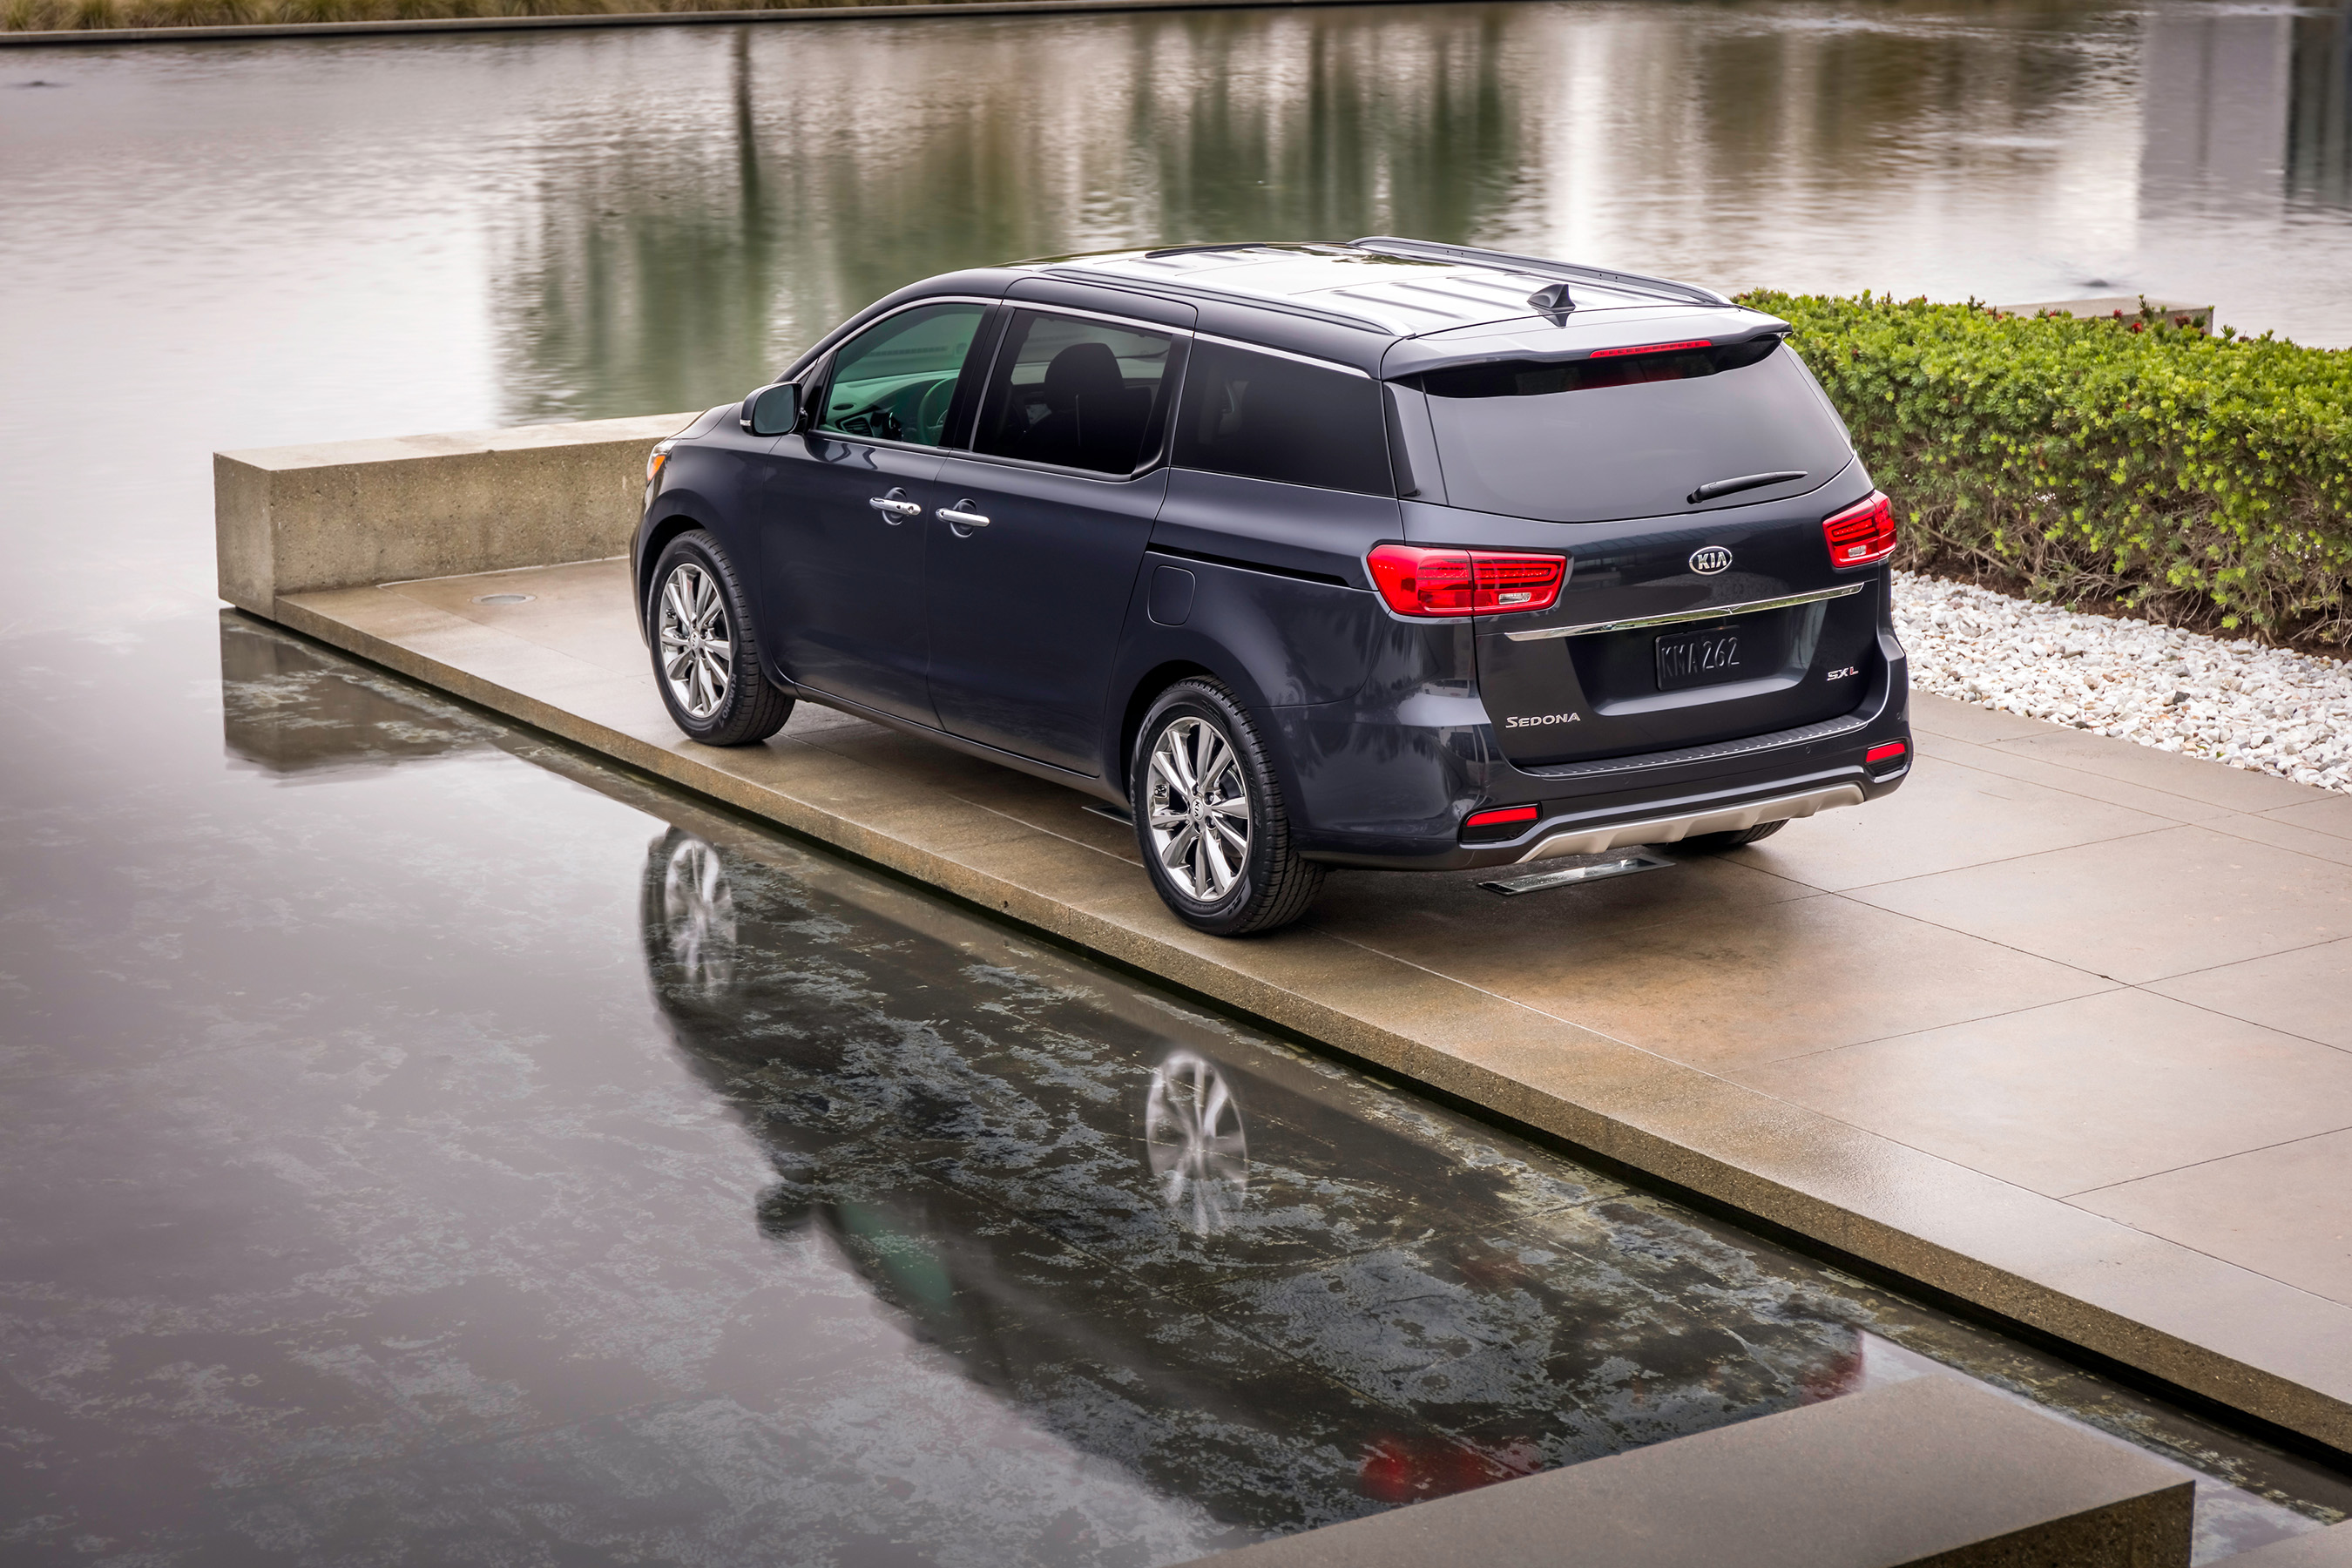 Subtle yet significant upgrades keep the refreshed 2019 Kia Sedona ahead of the minivan pack.